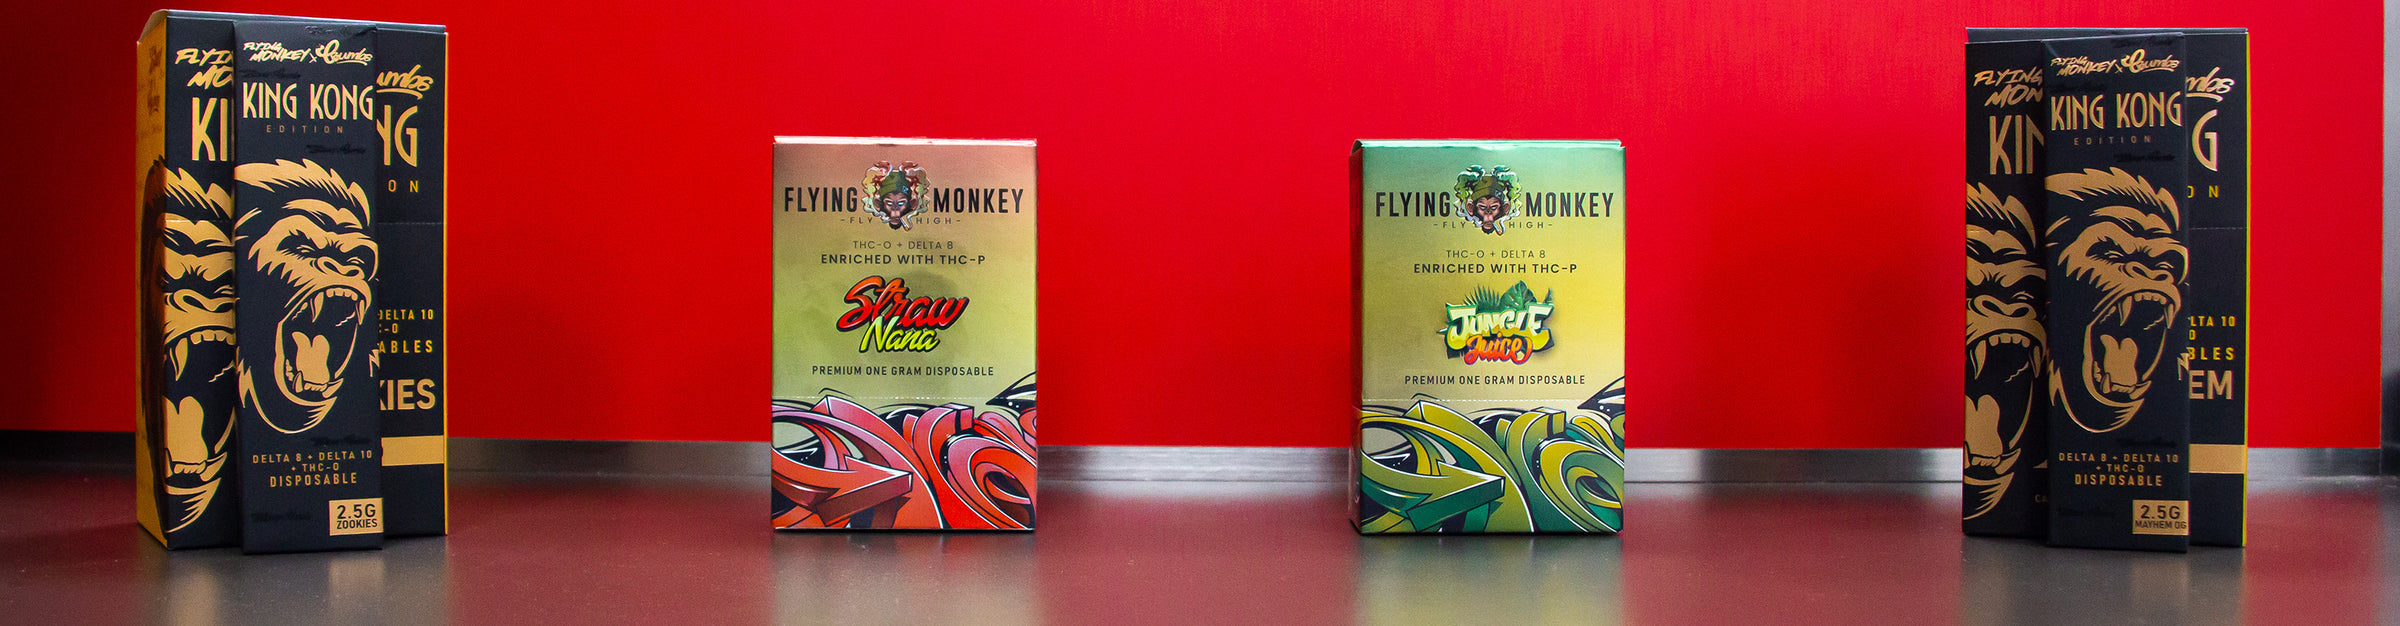 Wholesale Flying Monkey packages standing in a row on black and red desk